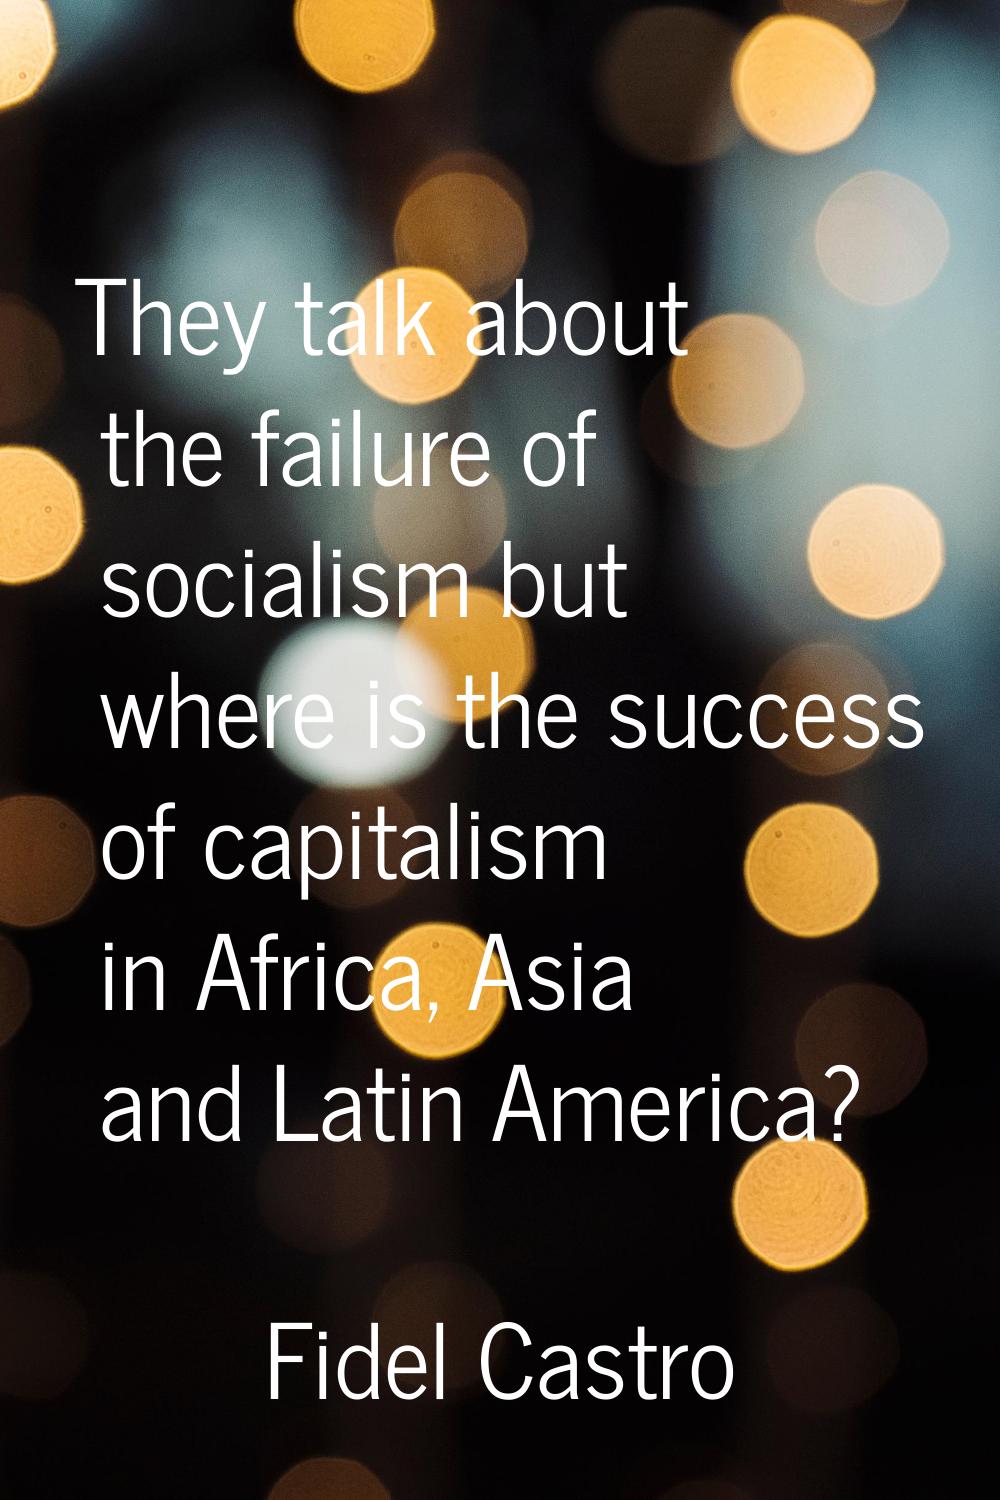 They talk about the failure of socialism but where is the success of capitalism in Africa, Asia and